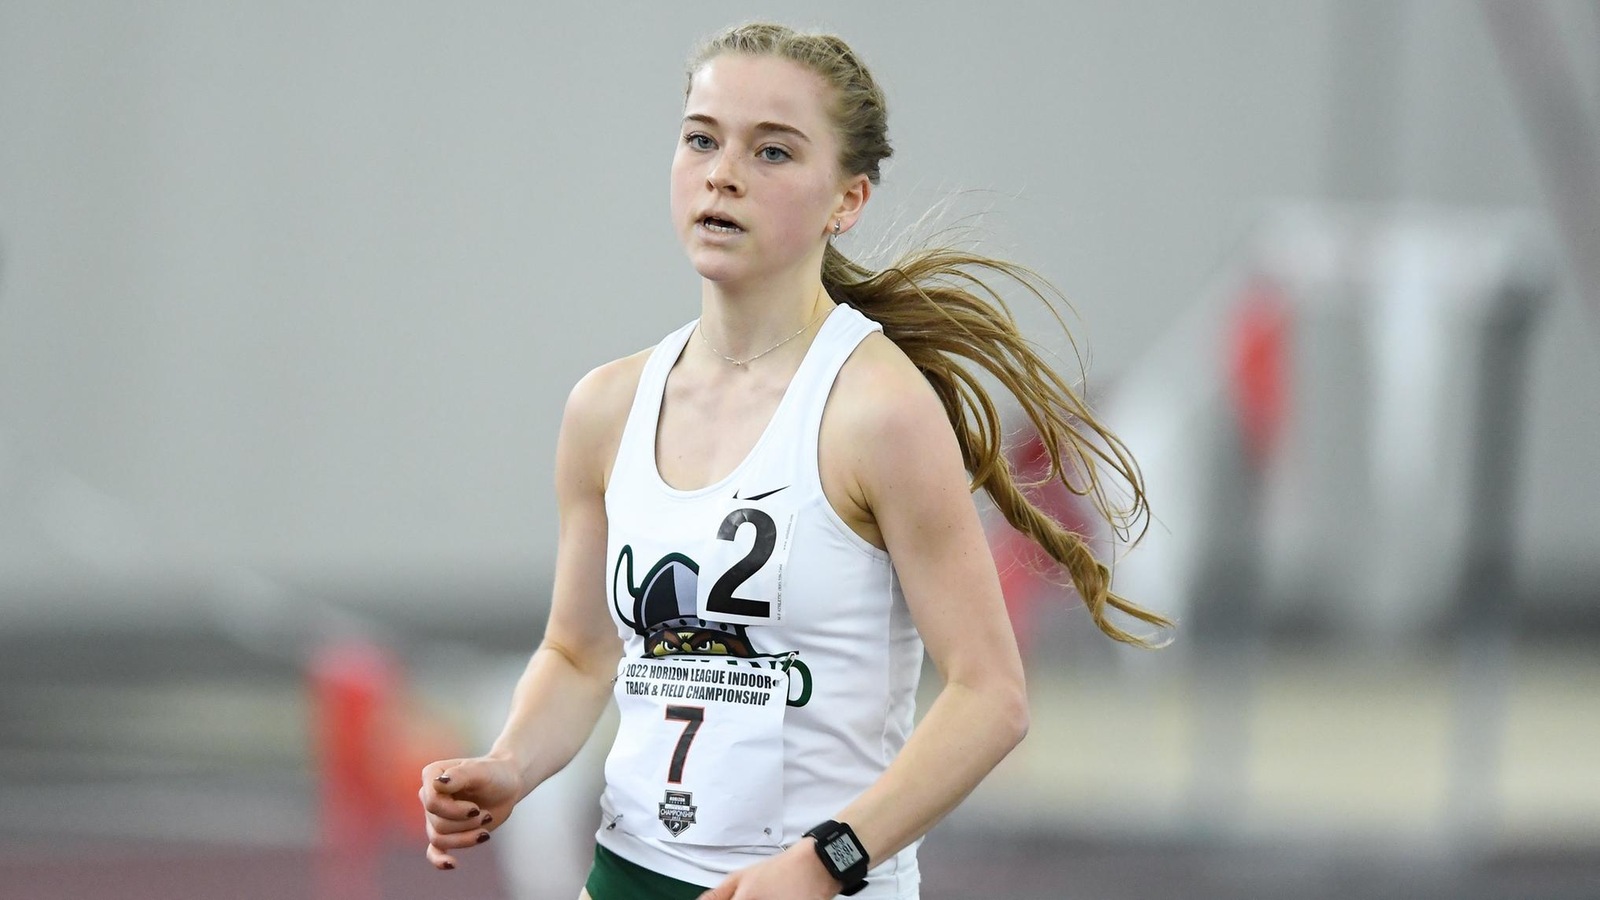 Cleveland State Track & Field Continues Indoor Season At Mastodon Invitational